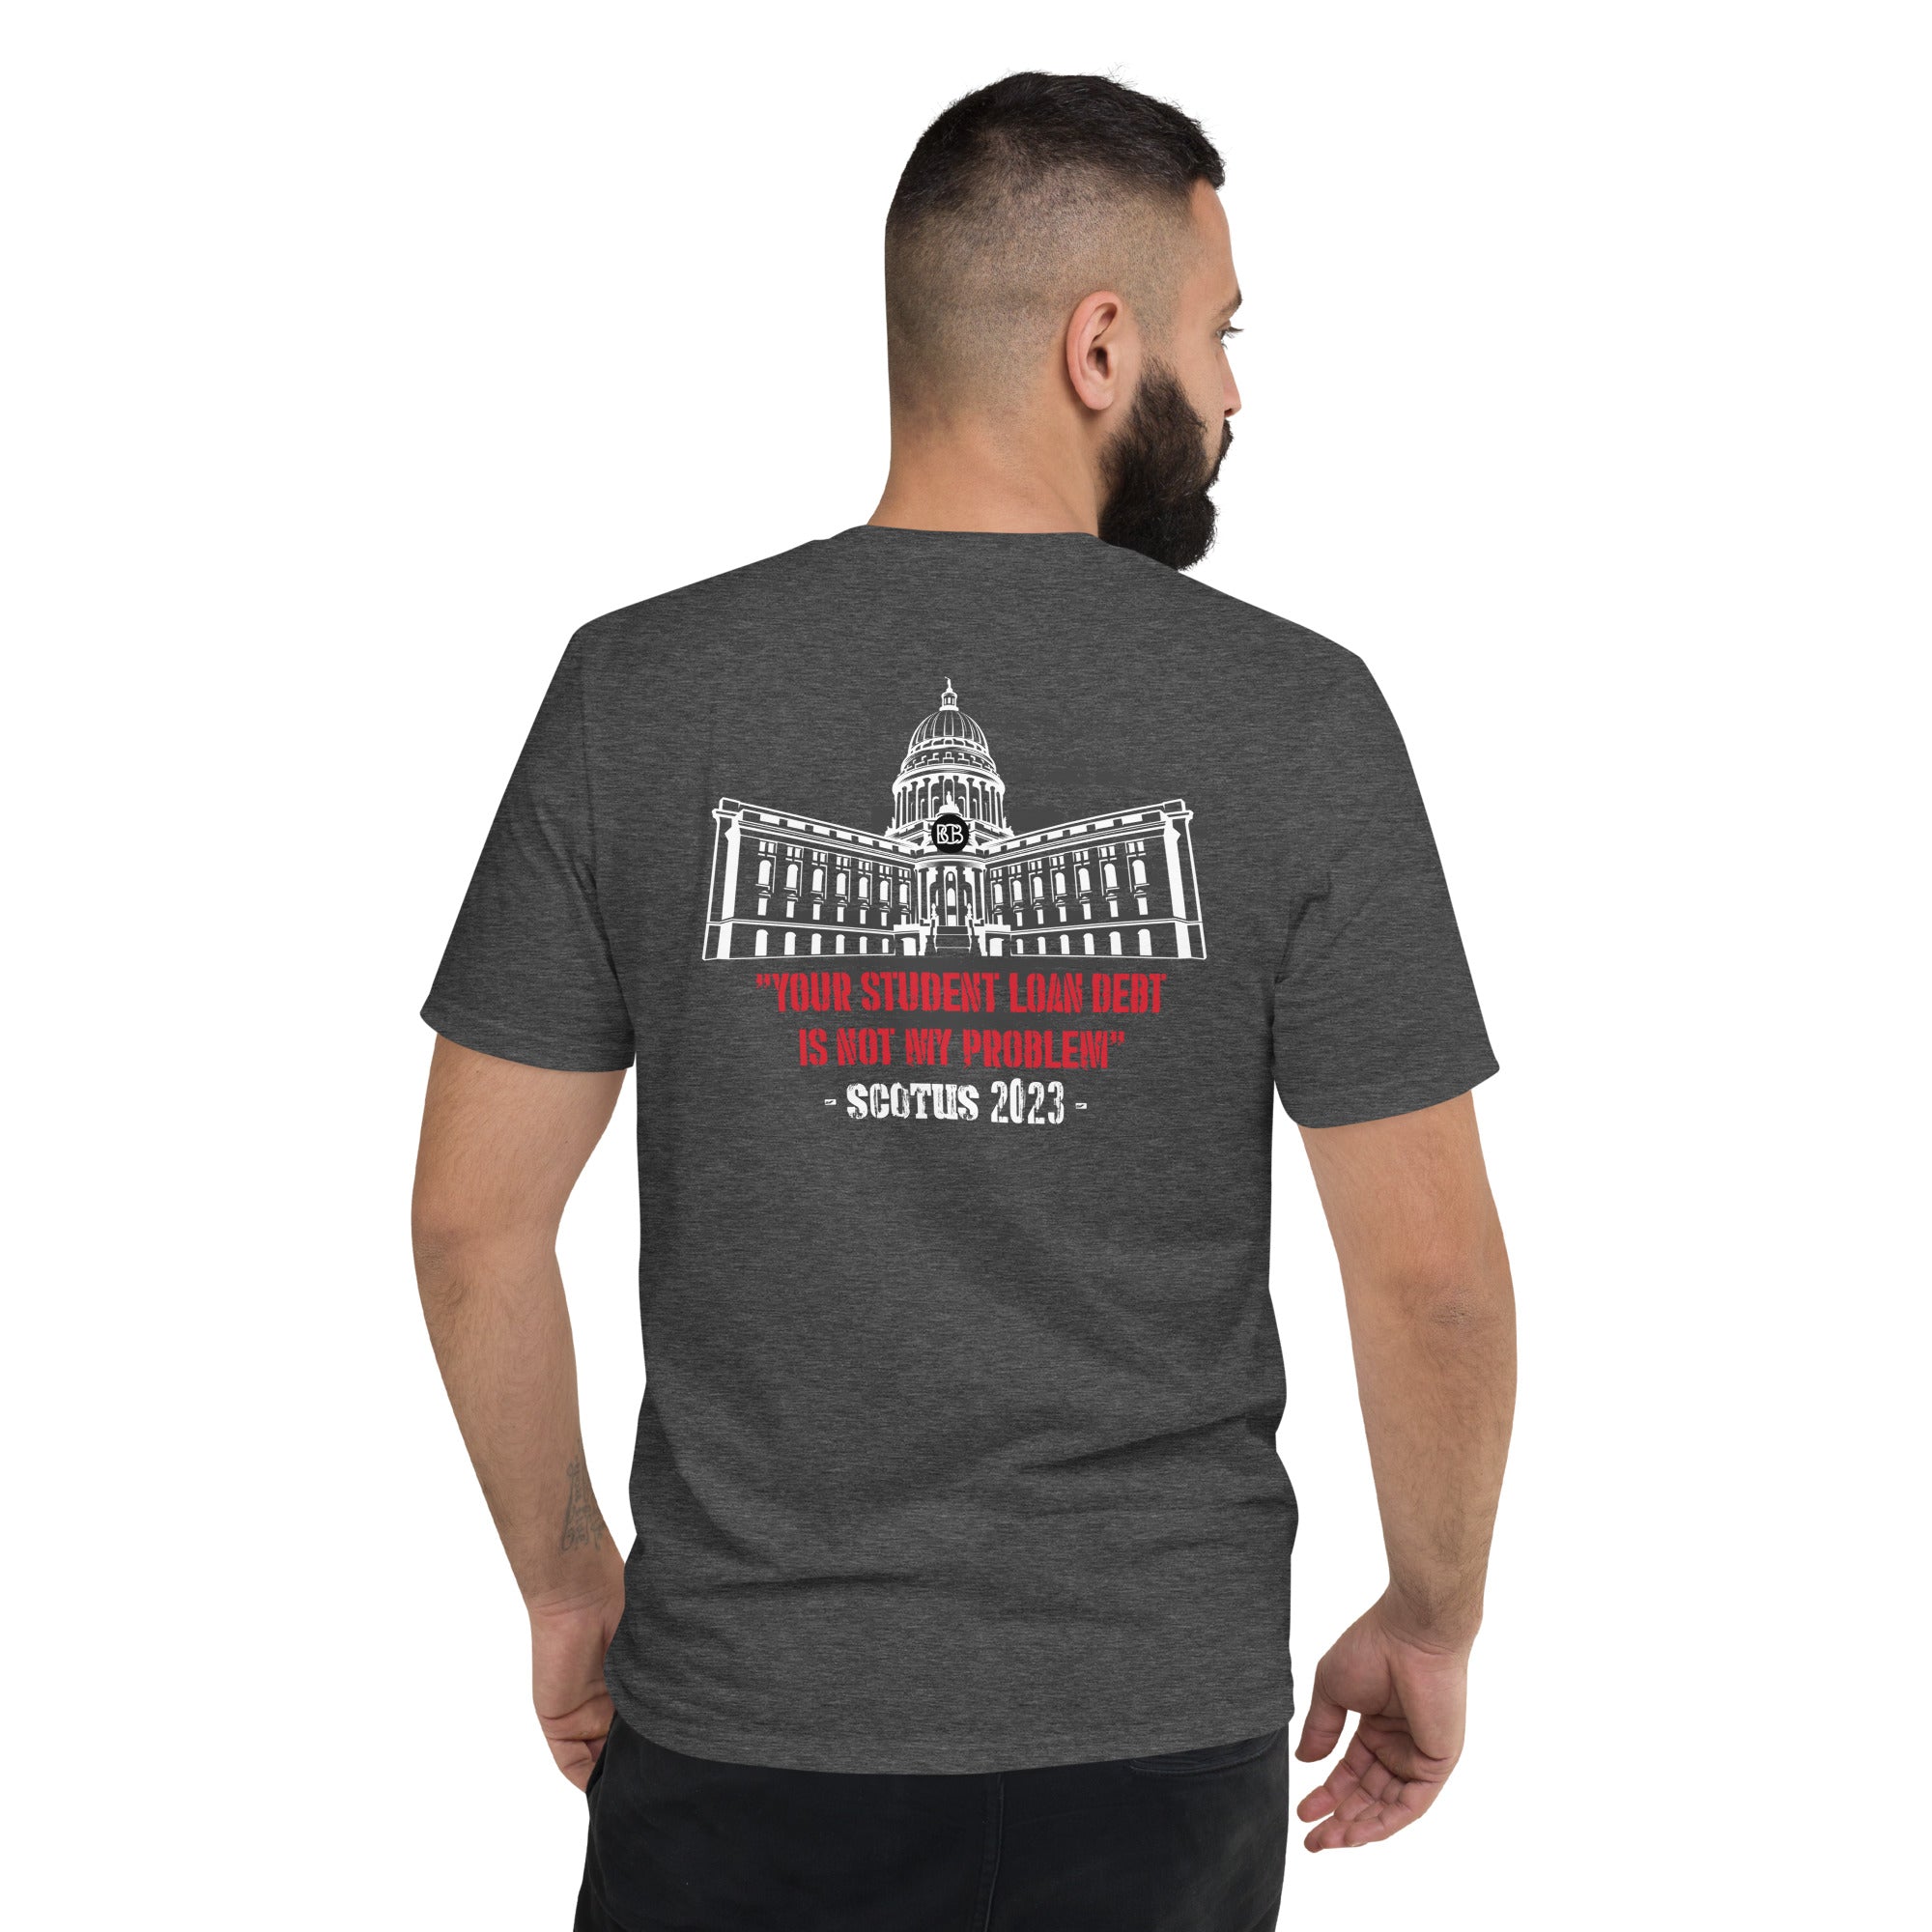 “Your student loan debt is not my problem.” -SCOTUS 2023-  I  Short-Sleeve T-Shirt